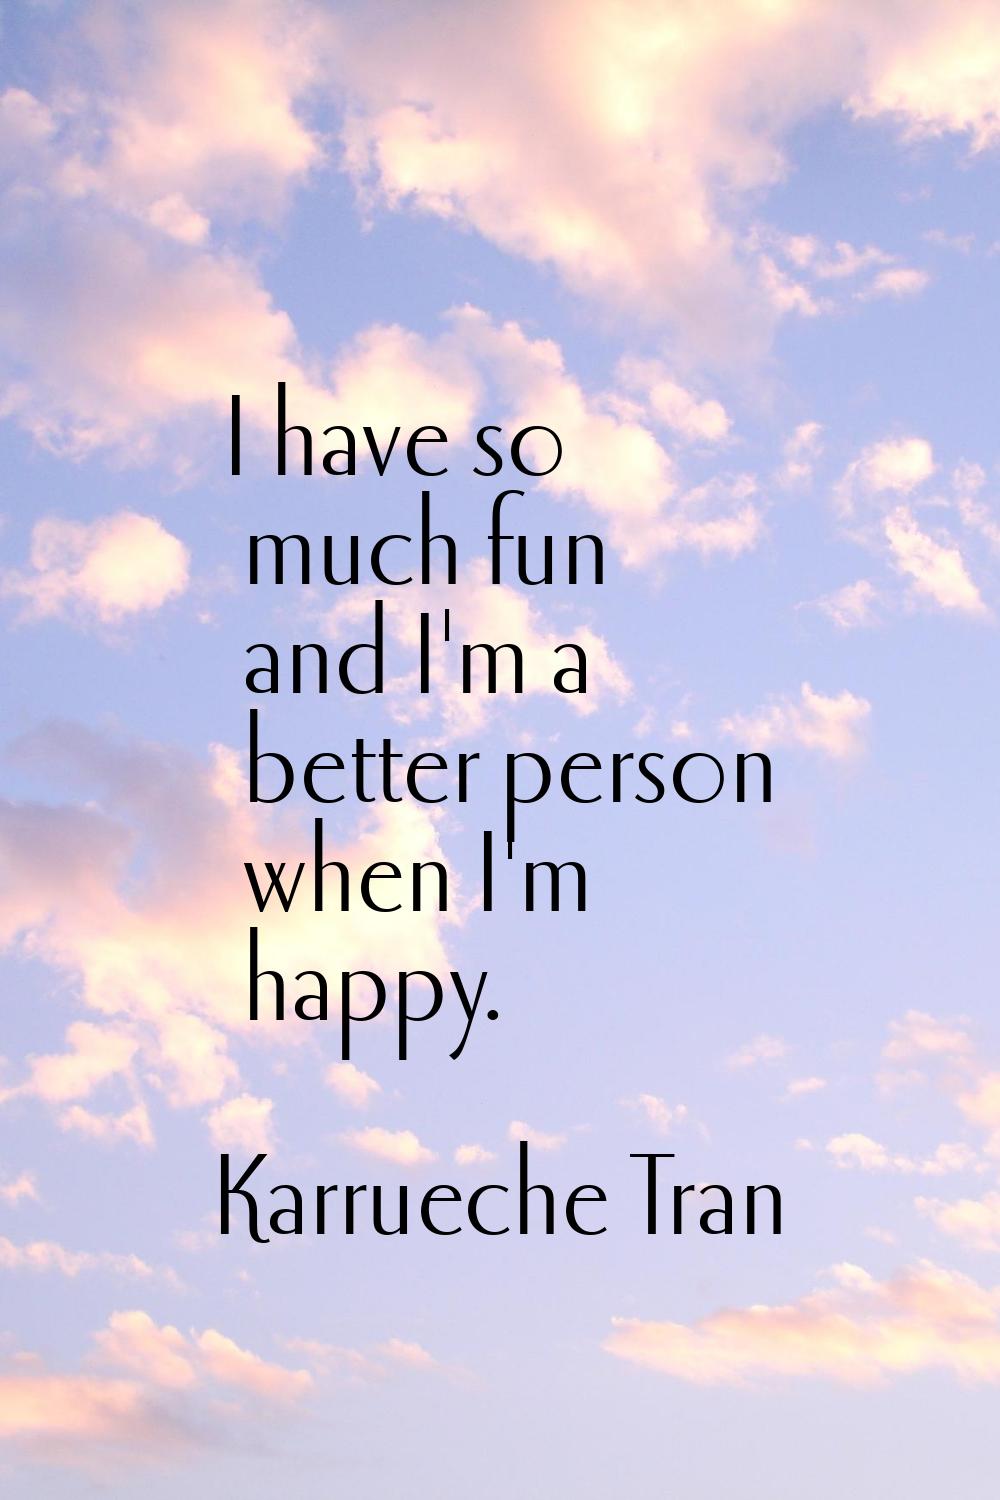 I have so much fun and I'm a better person when I'm happy.